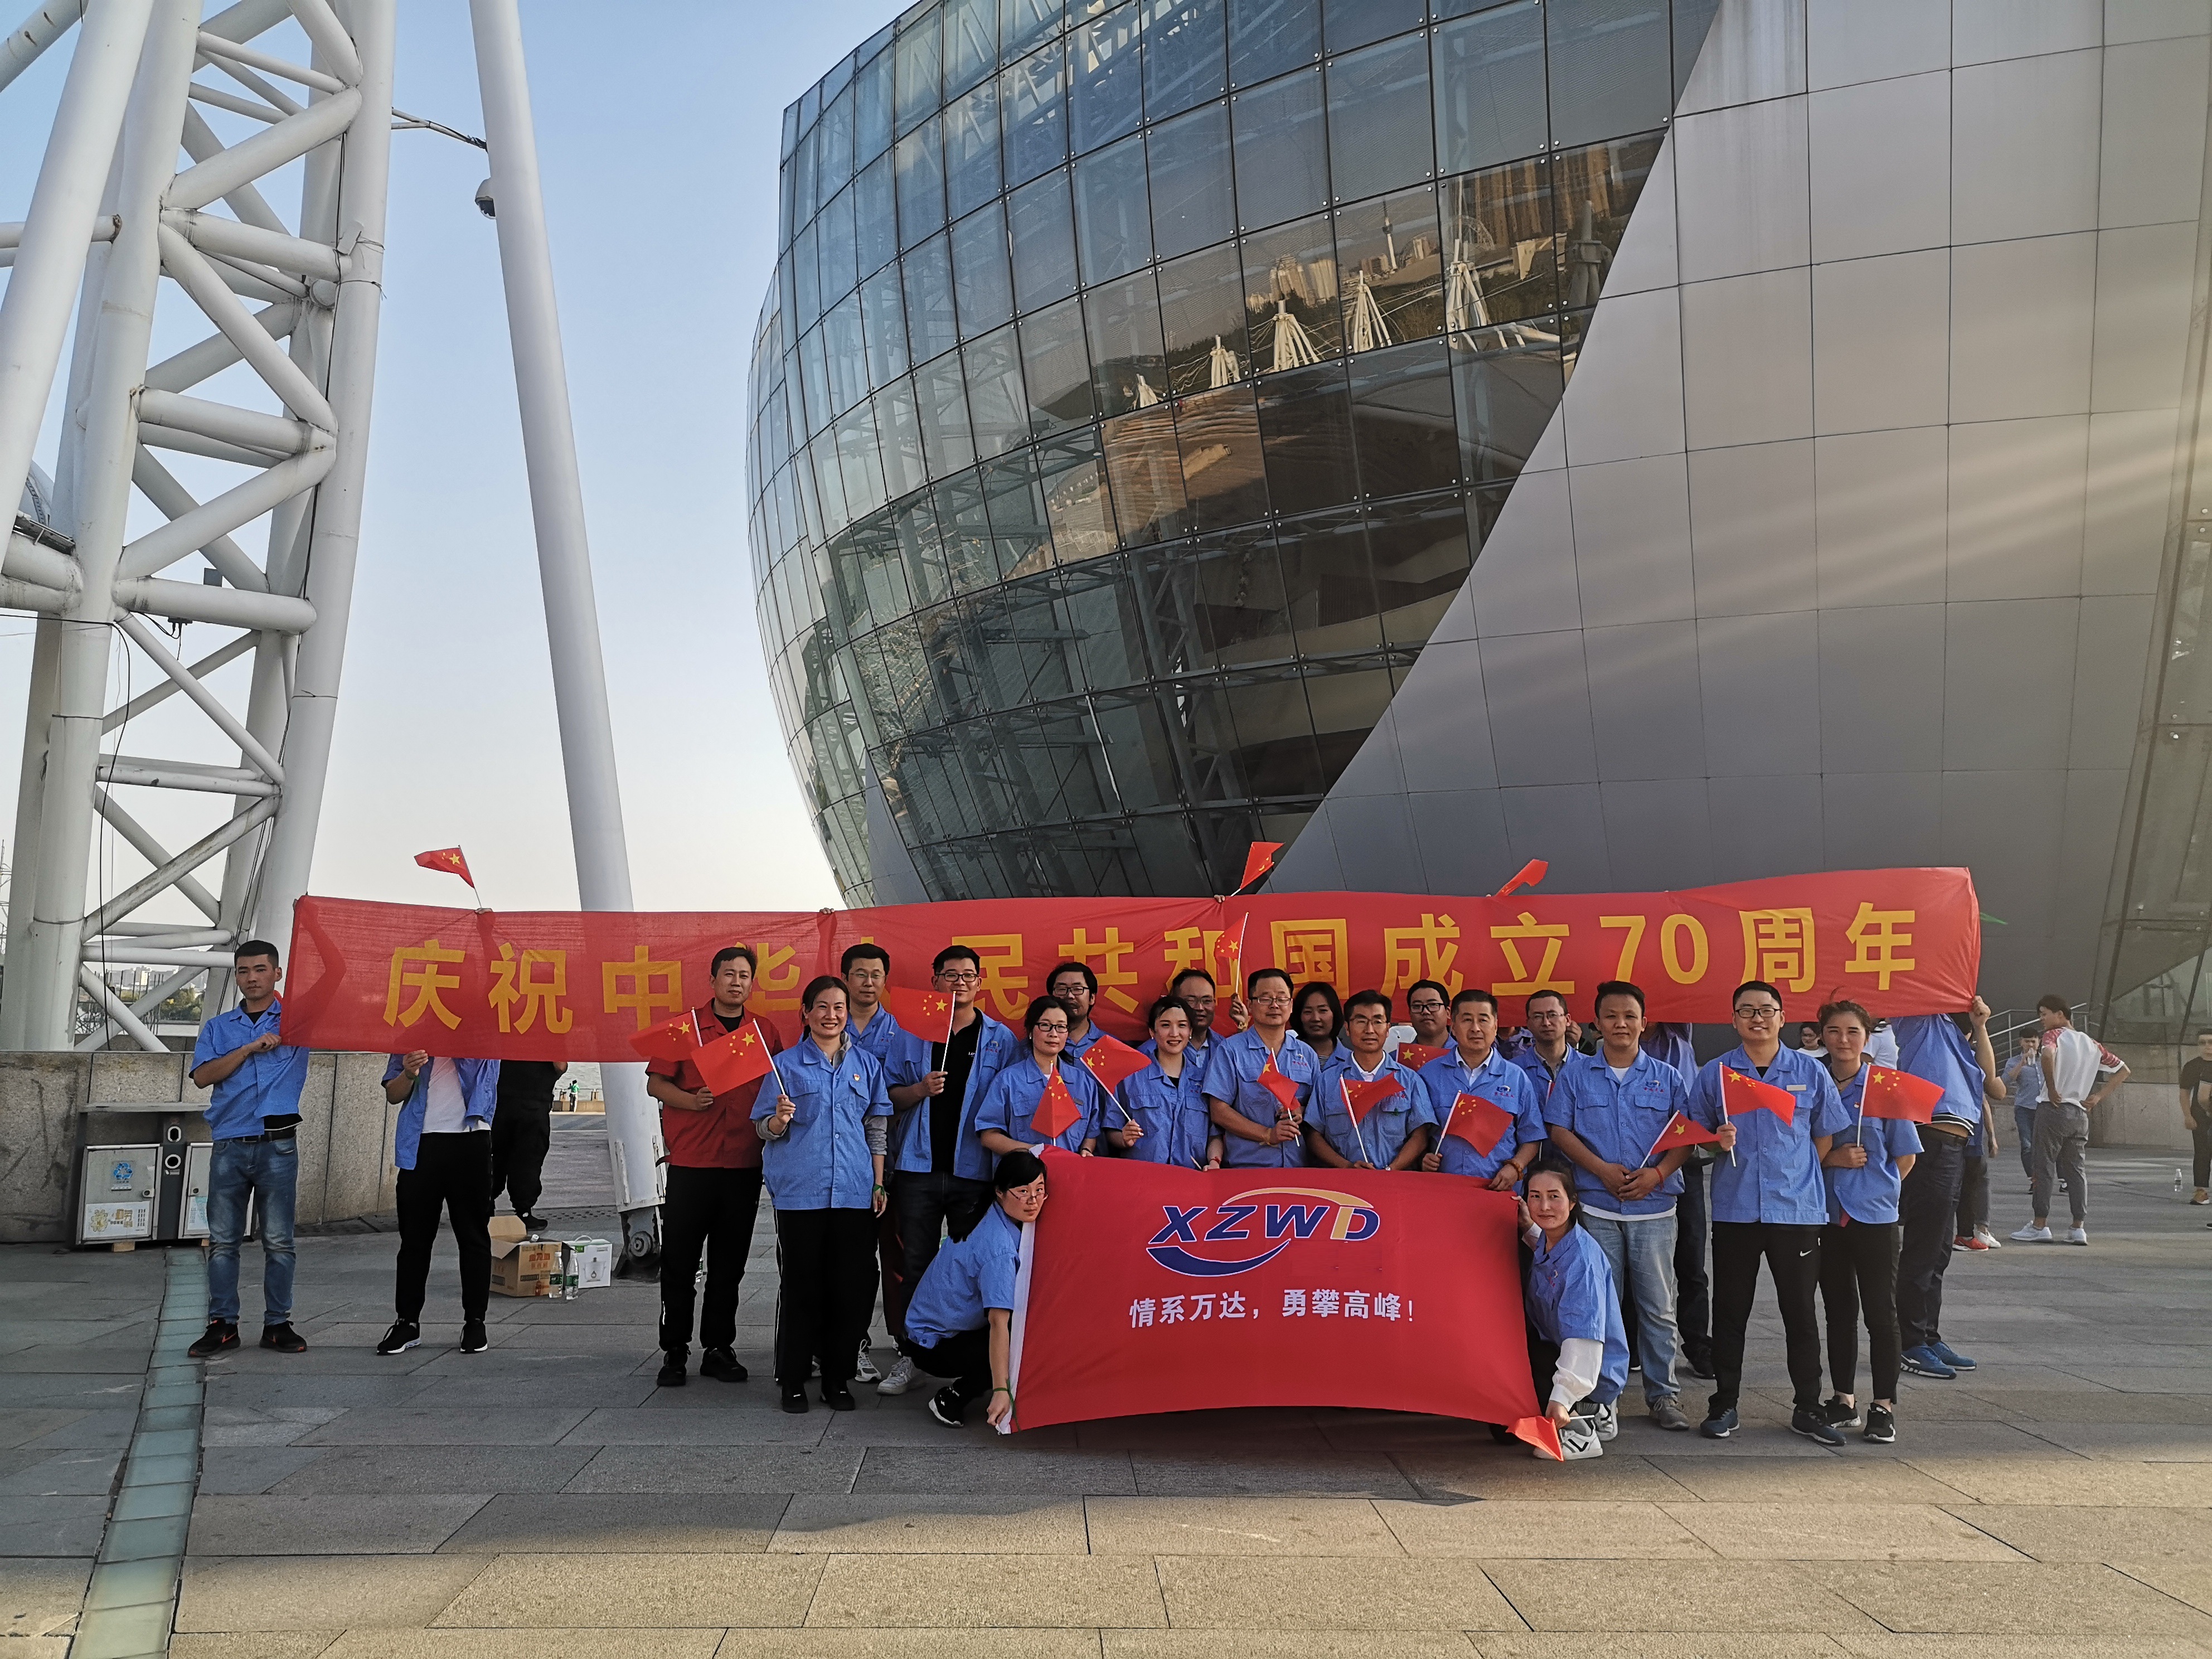 Activities for the 70th anniversary of the founding of the people's Republic of China